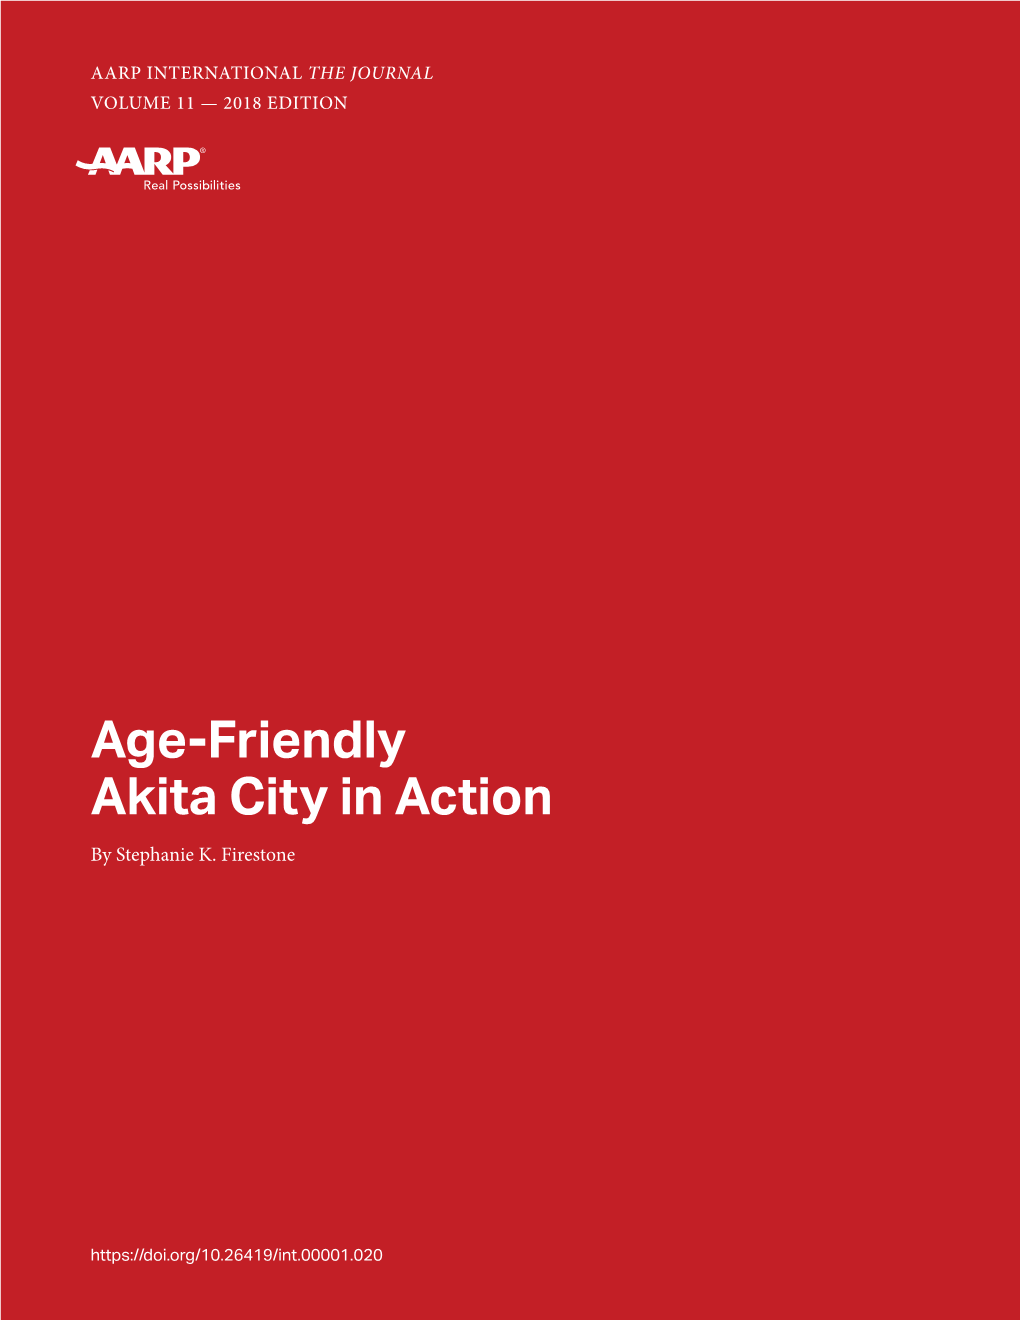 Age-Friendly Akita City in Action by Stephanie K